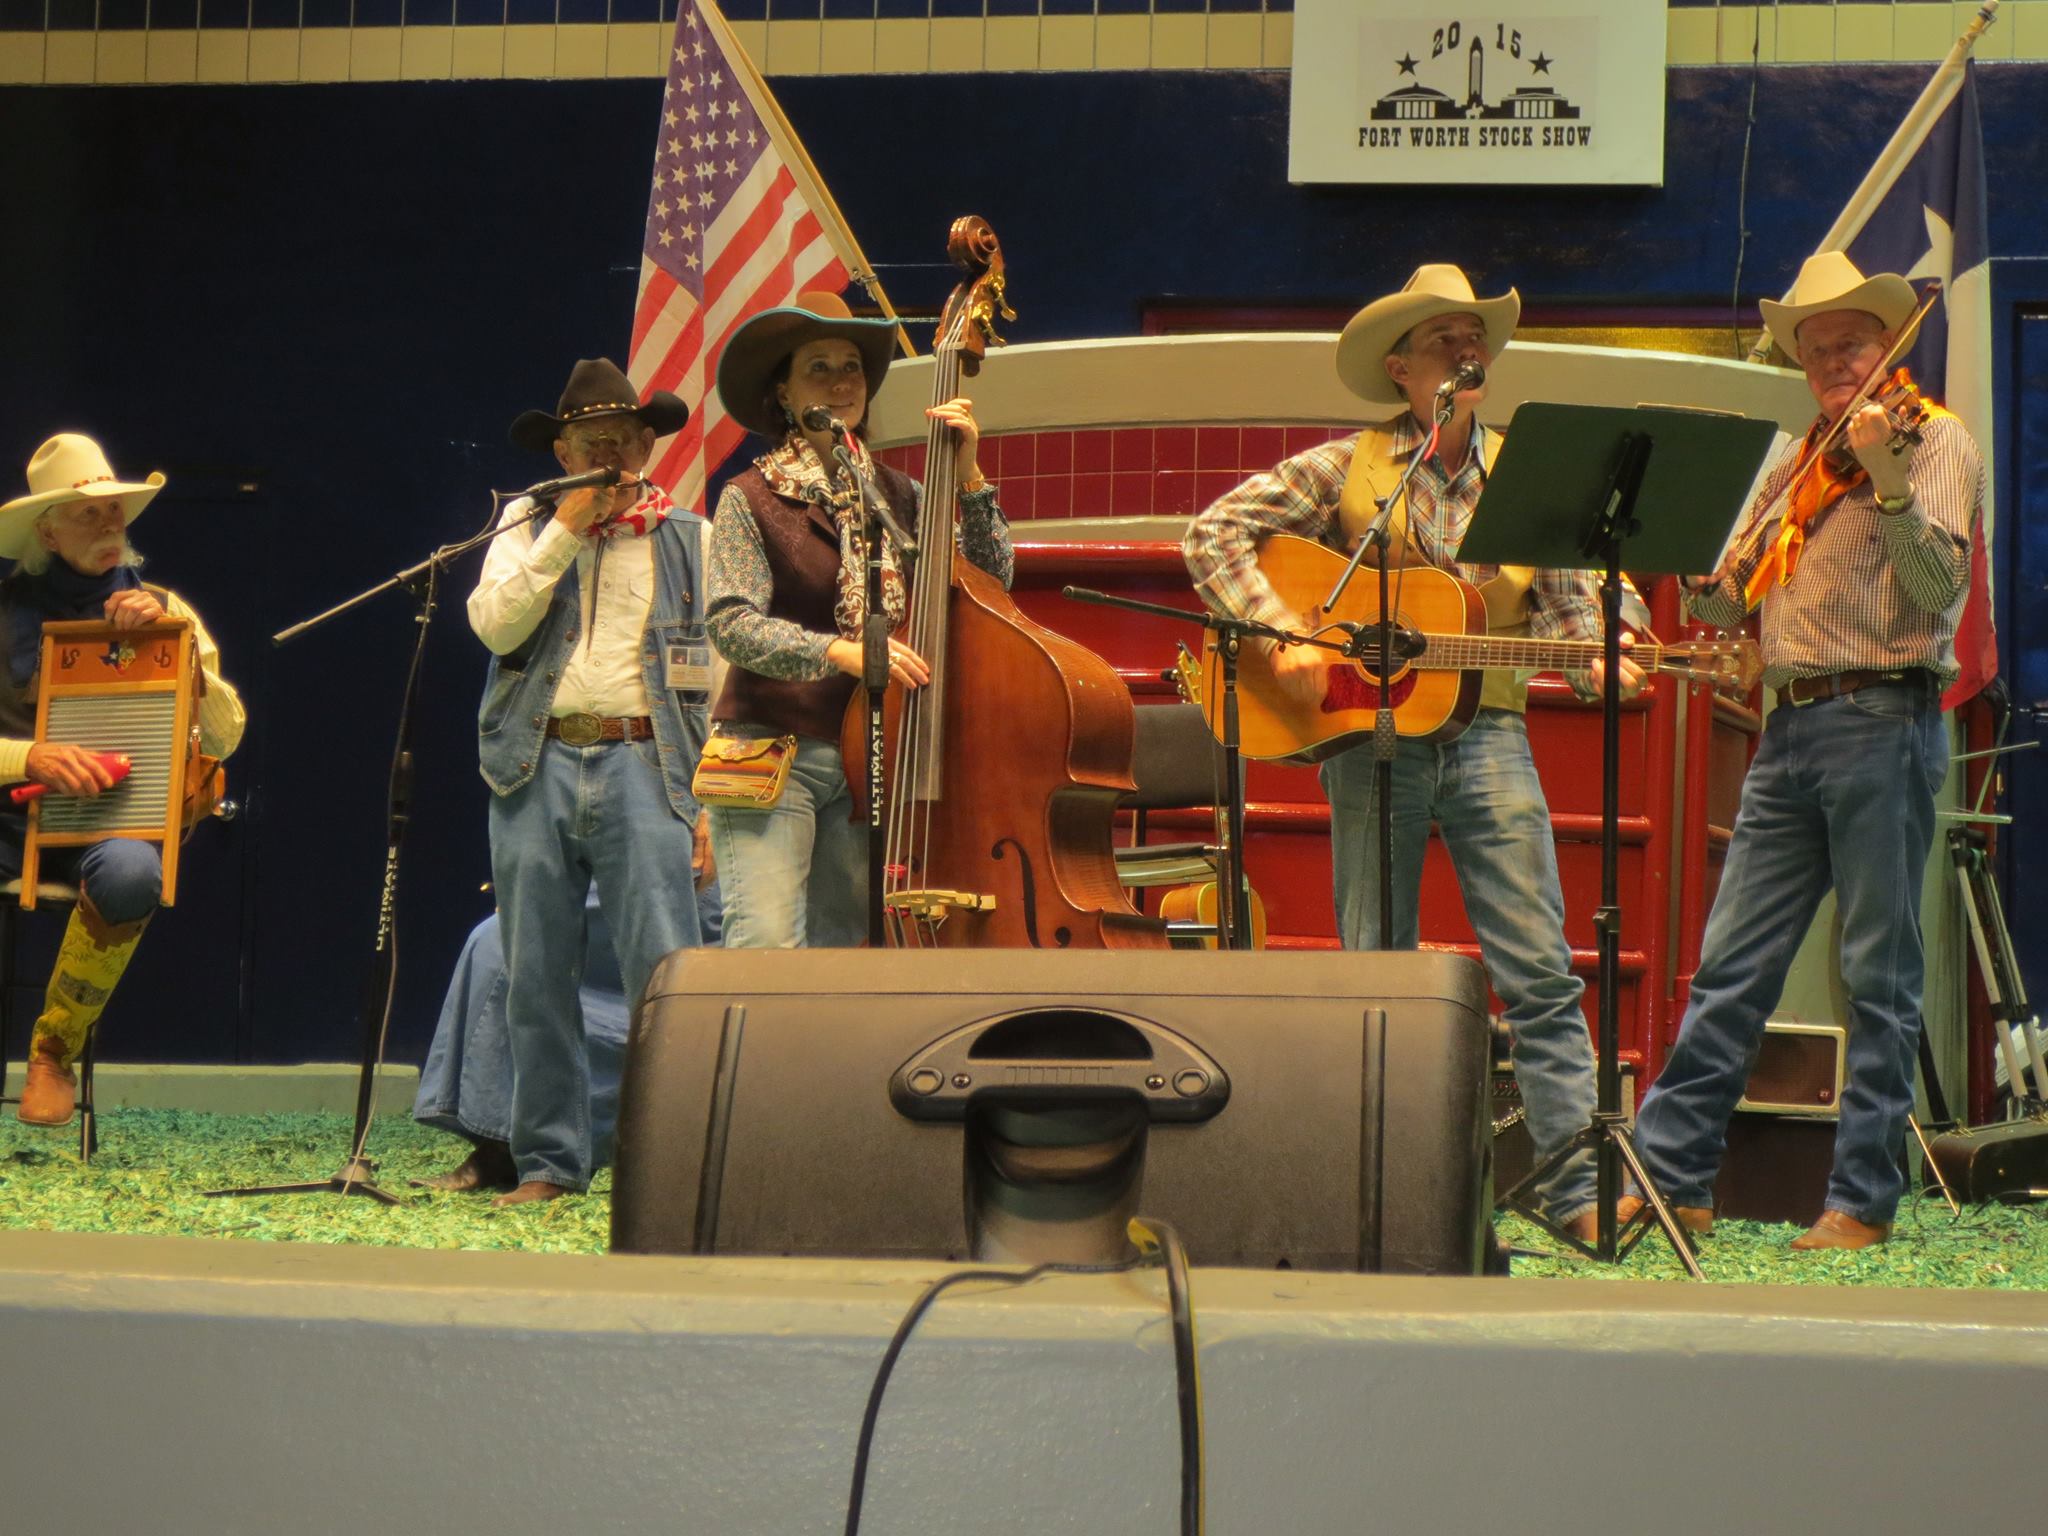 Johnny Davis, Al Connors, Johnie Terry, Bob Terry and Mel Whirley performing at the Fort Worth Stock Show and Rodeo during the Cowboy Campfire Tales event 2015.